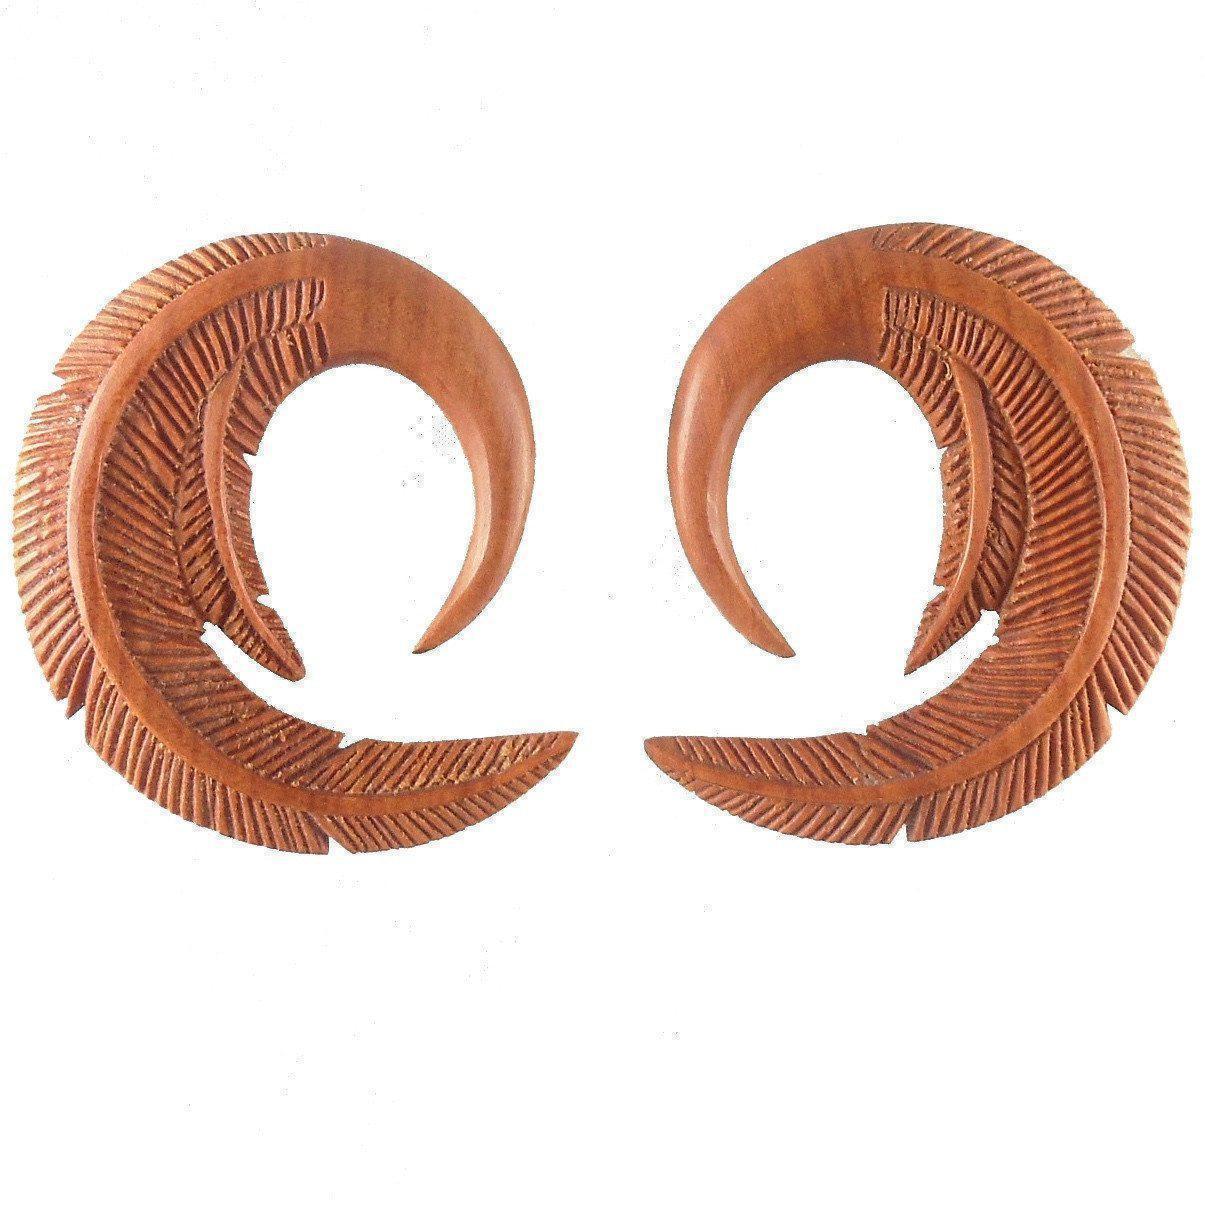 Gauges :|: Feather. 0 gauge Sapote Wood Earrings. 1 3/4 inch W X 1 3/4 inch L | Wood Body Jewelry